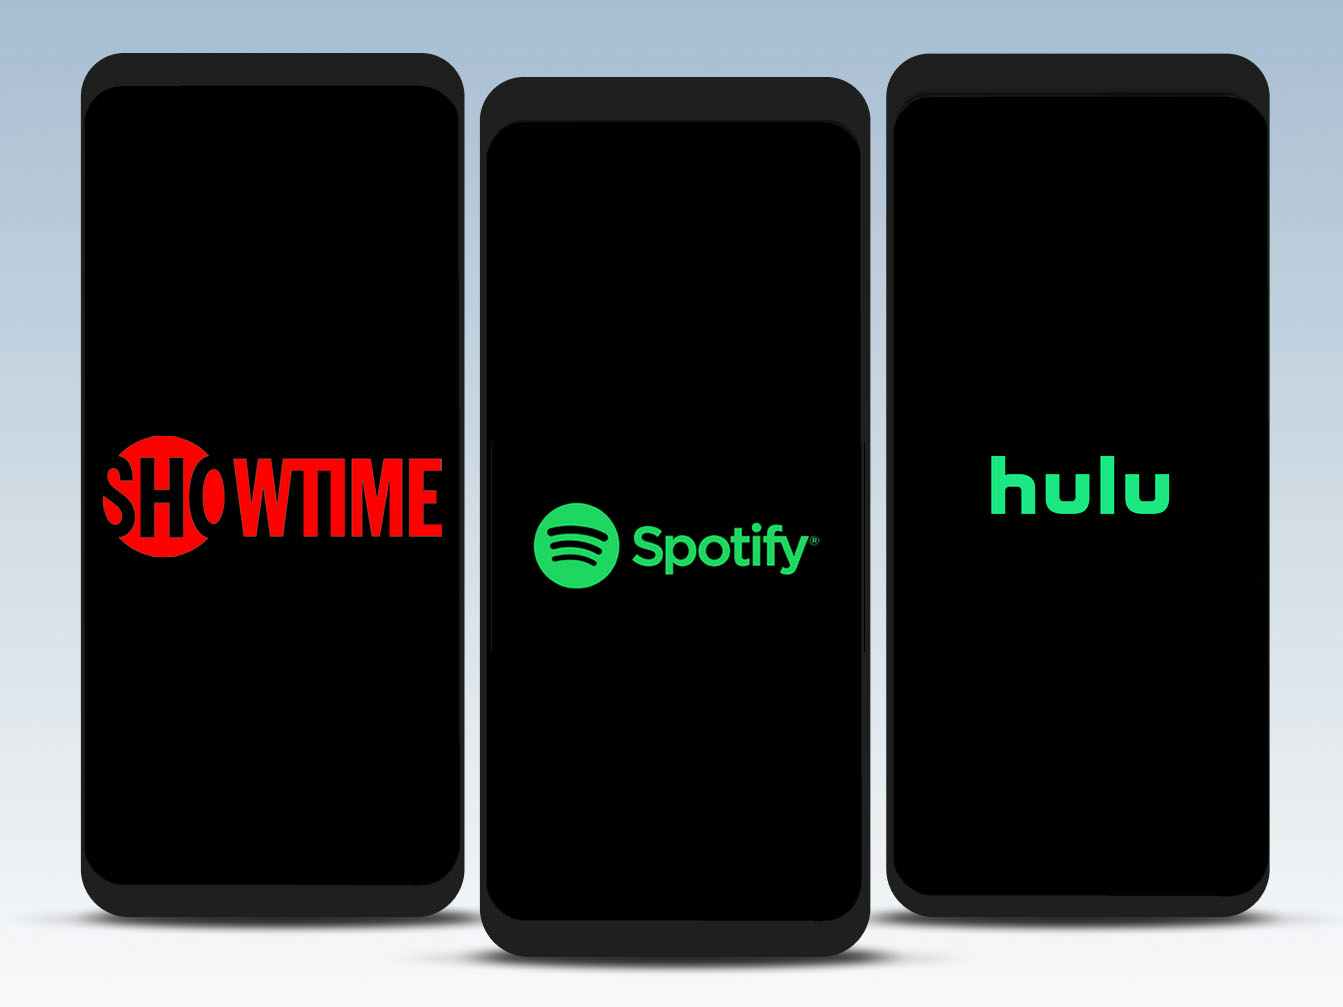 Spotify Showtime and Hulu student discount bundle, three phones, each one showing the logo for Showtime, Spotify, and Hulu